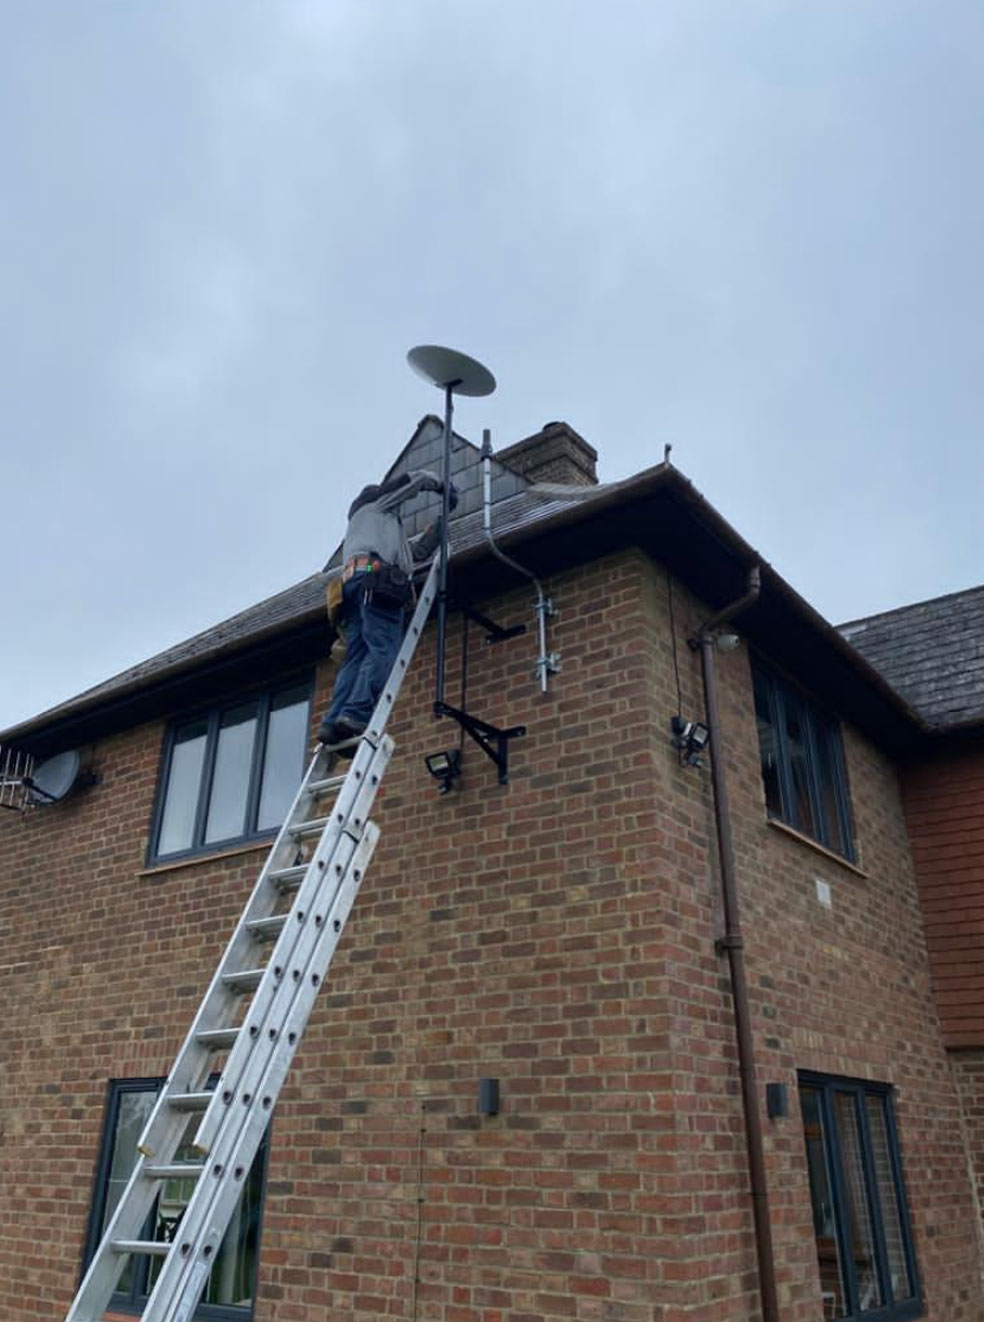 Our first visit to sort out an installation carried out by another company. The dish was mounted on a Sky bracket and Starlink adapter which was not suitable for purpose. The house was in open countryside and exposed to very high winds causing the original install to move about and creak annoying the customer. Dish location Alton in Hampshire.